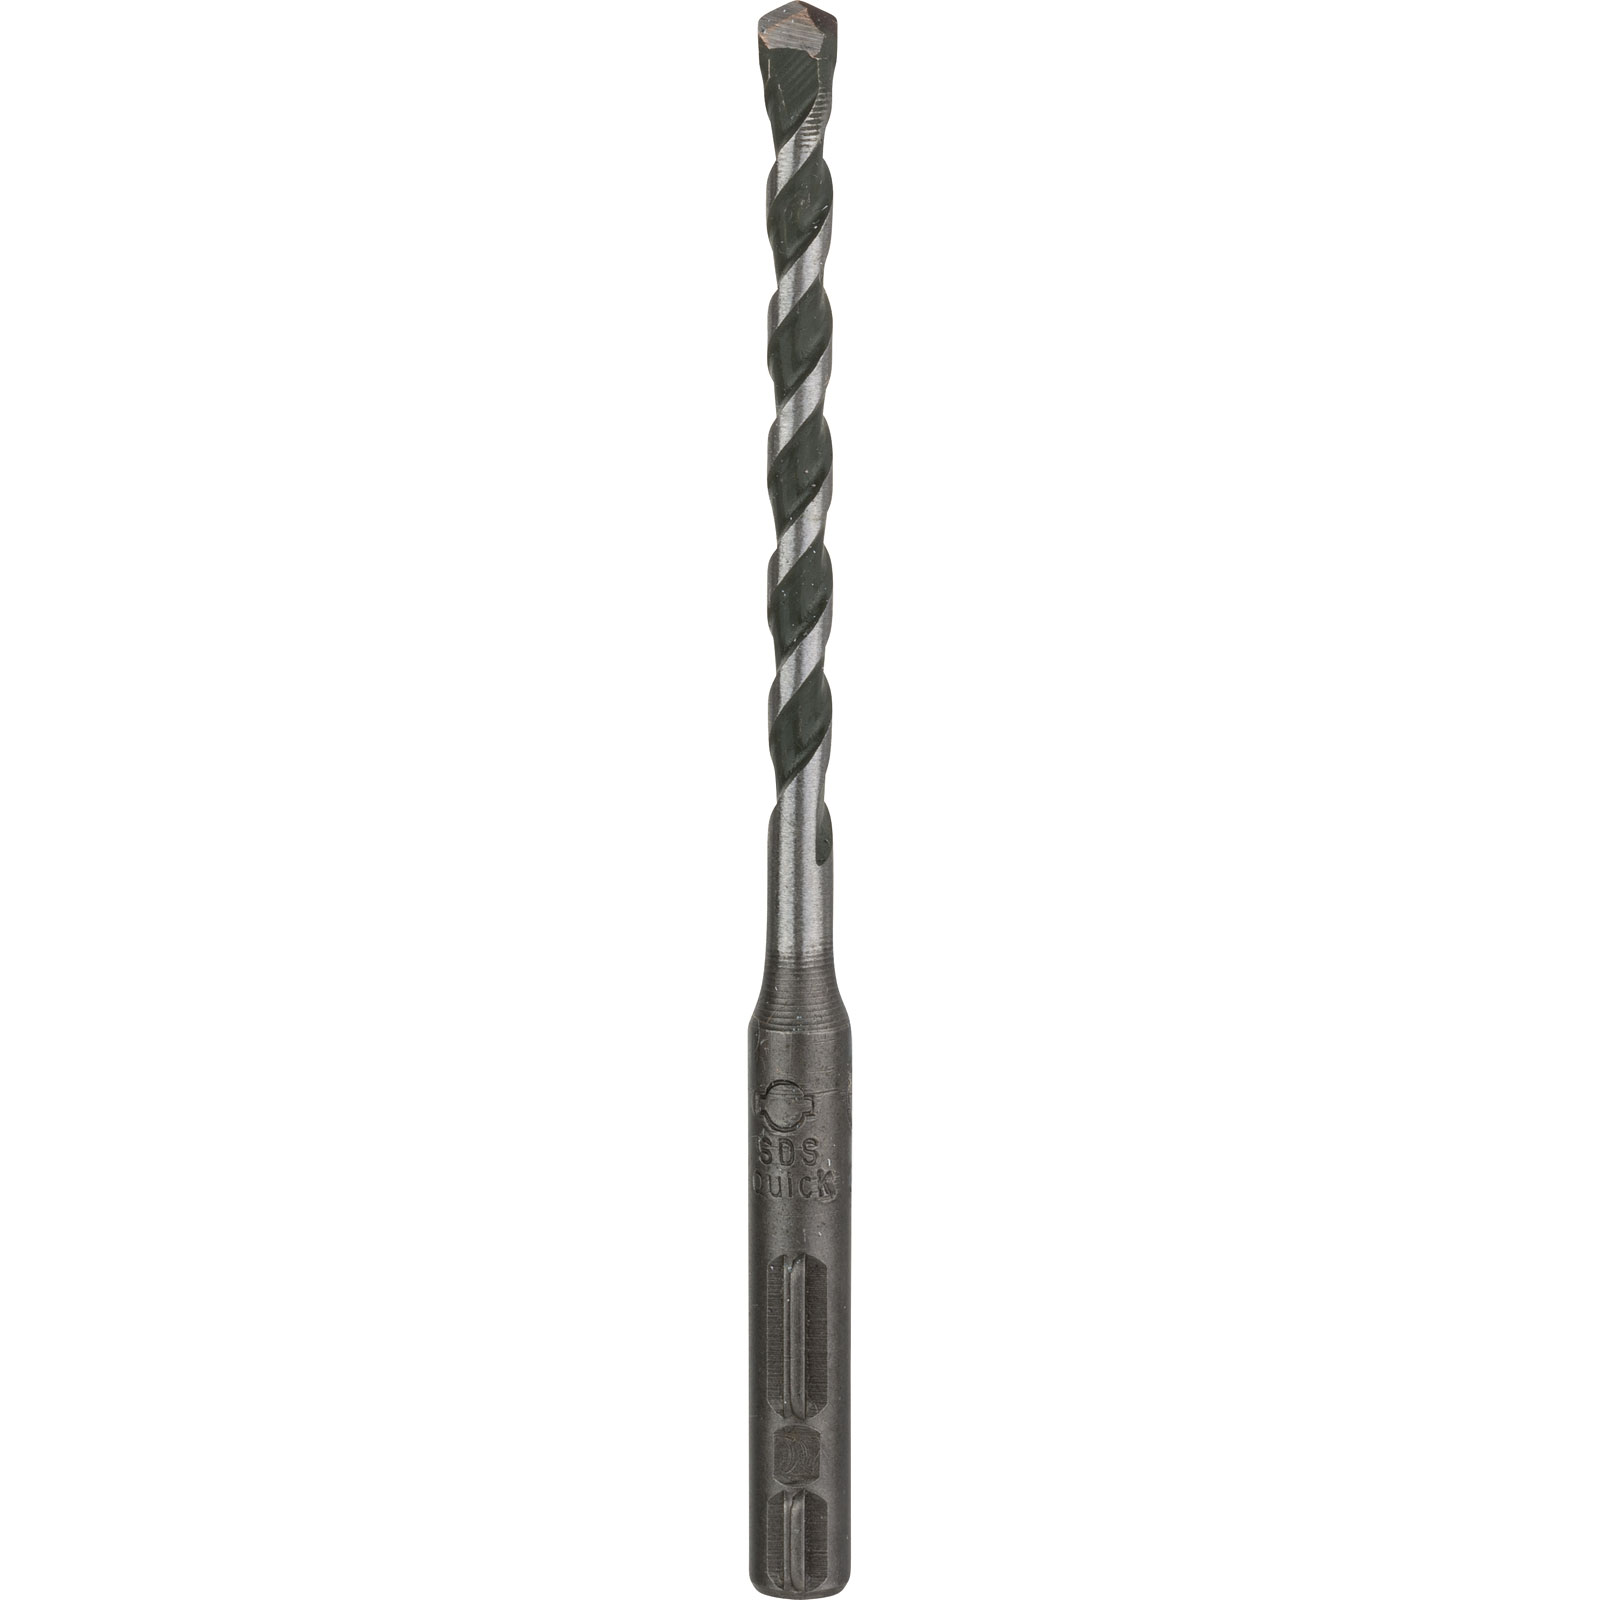 Photo of Bosch Uneo Sds Quick Multi Purpose Drill Bit 5mm 100mm Pack Of 1